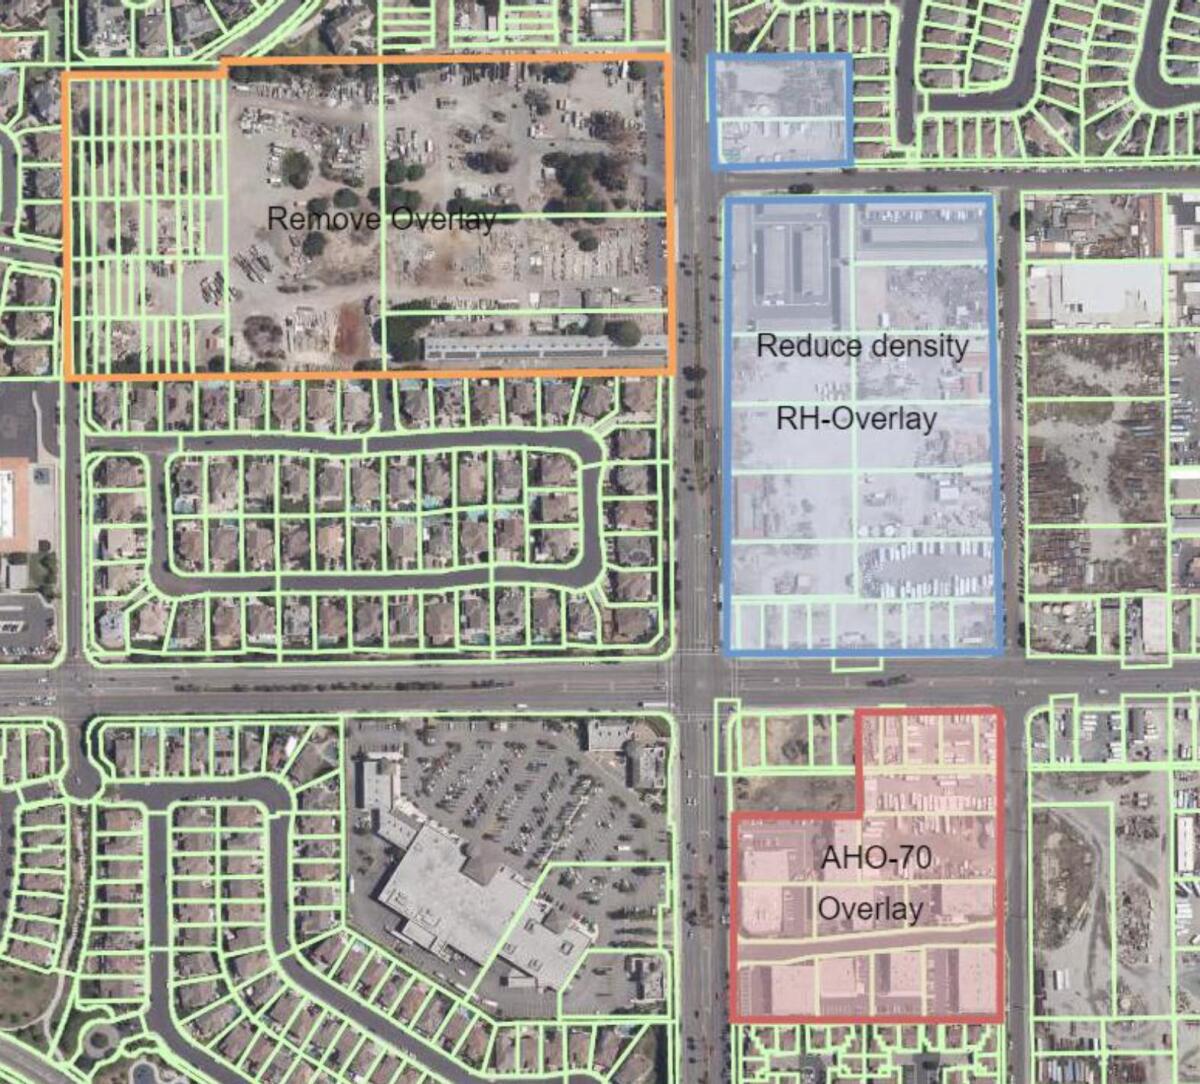 An option preferred by City Council members would remove the overlay in the SP7 (Ellis-Goldenwest) area.